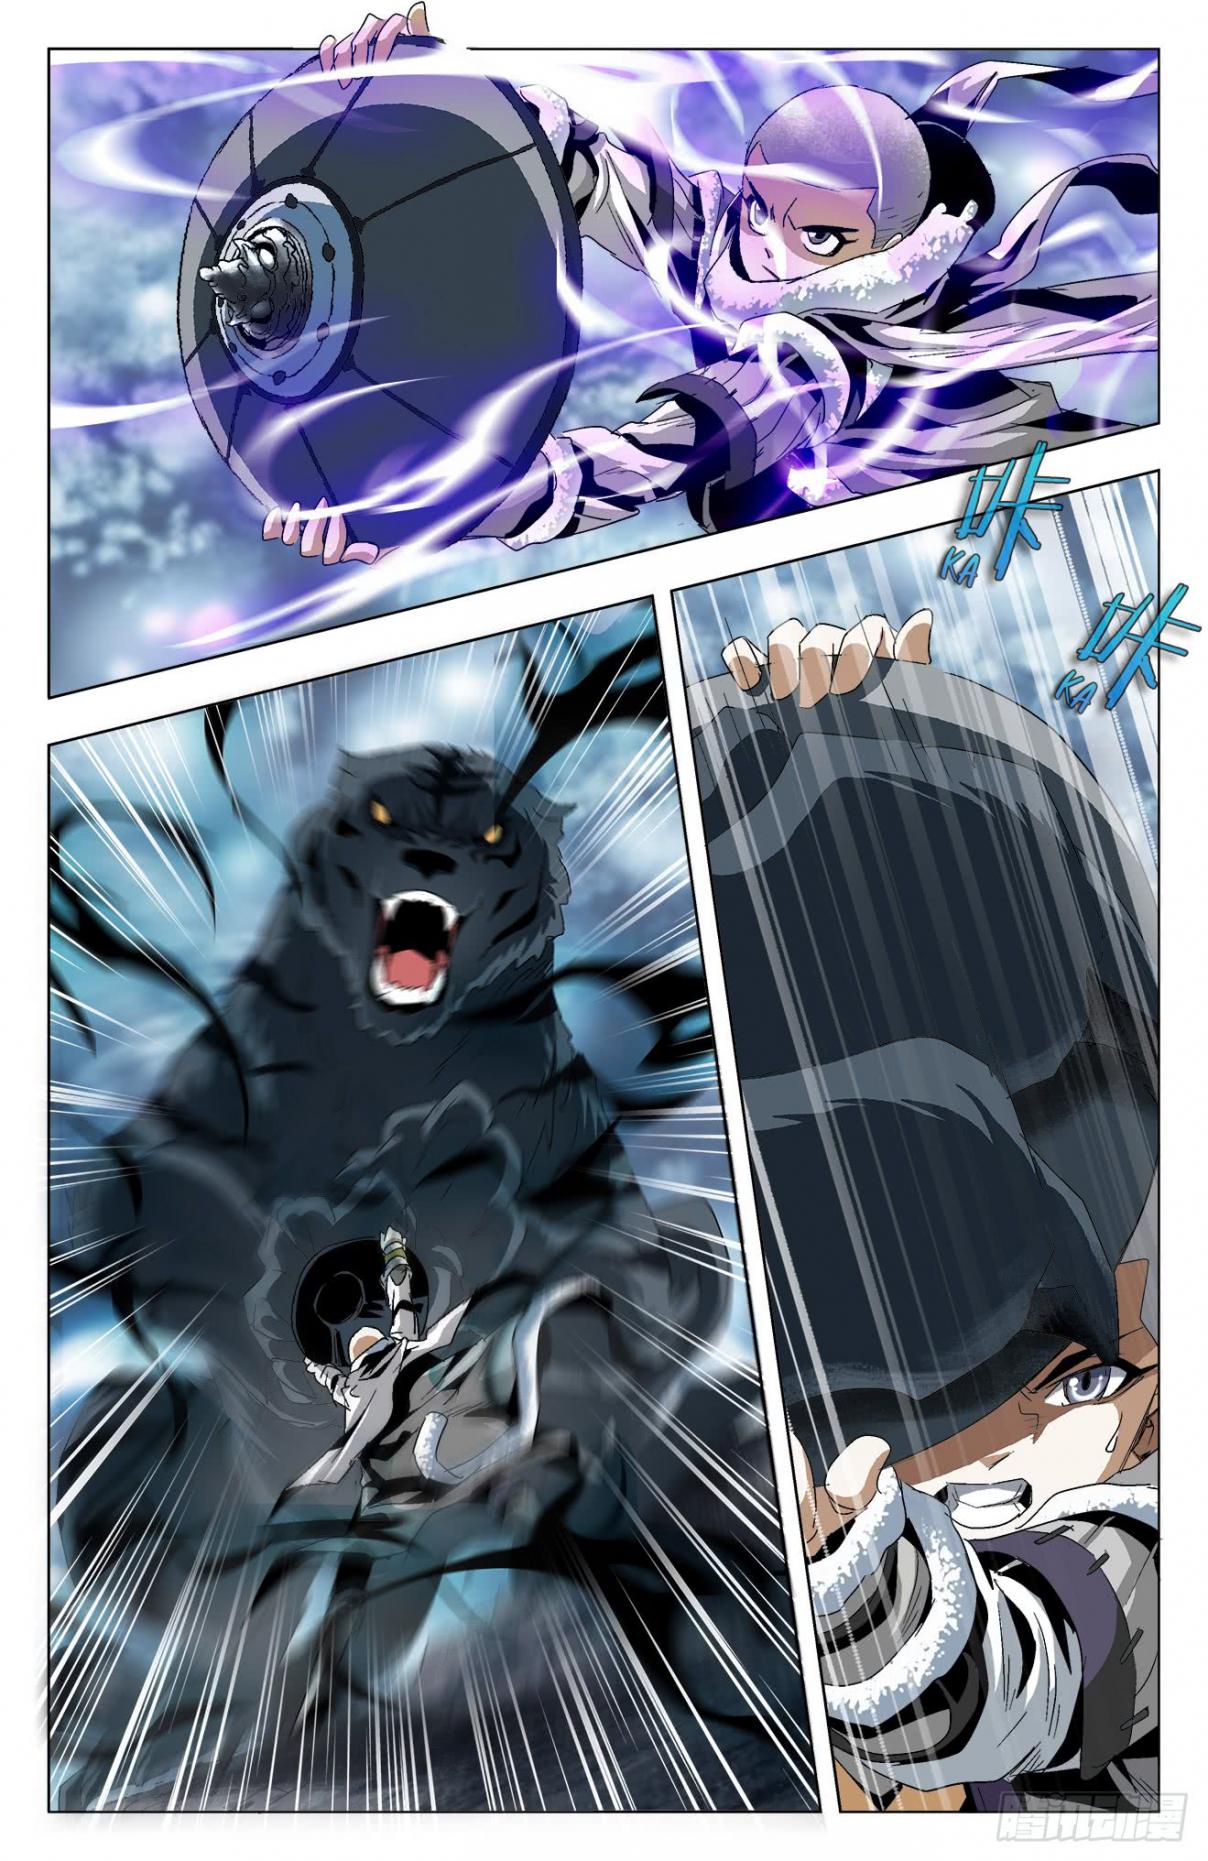 Fights Break Sphere – Return of the Beasts Ch. 32 Two Fighting Tigers